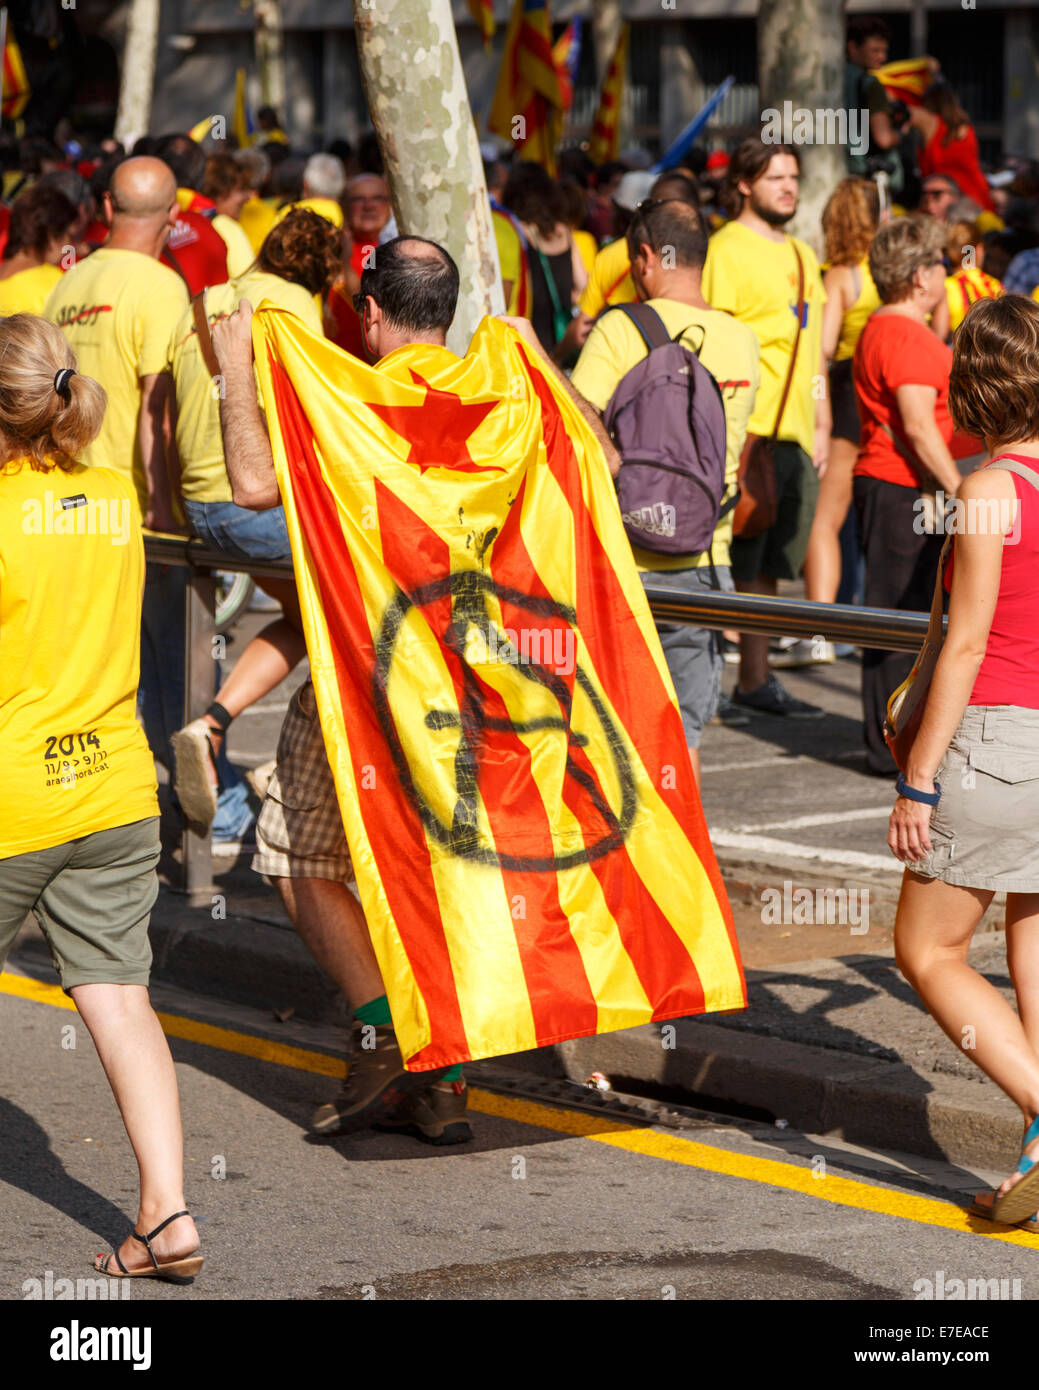 Barcelona, Spain - September 11, 2014: People call for Catalan independence on the 300th Catalan National Day in the streets of  Stock Photo